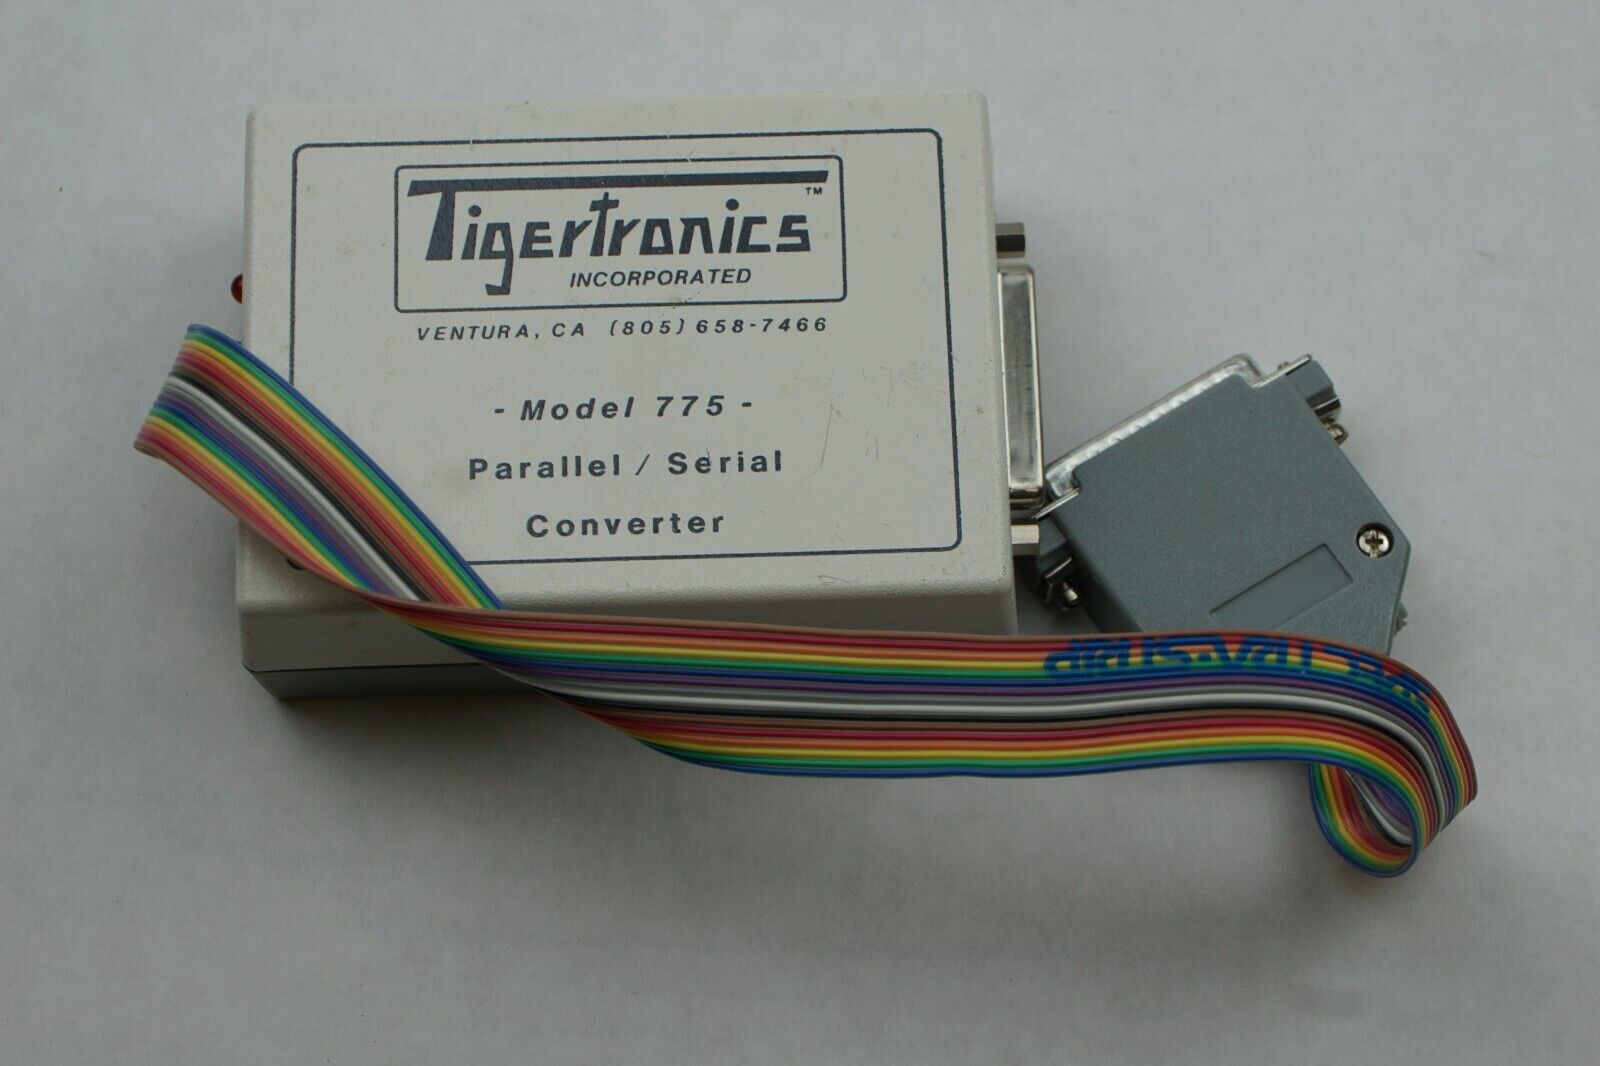 Vintage Tigertronics 775 Parallel Serial Converter Adapter for IBM PC Computer